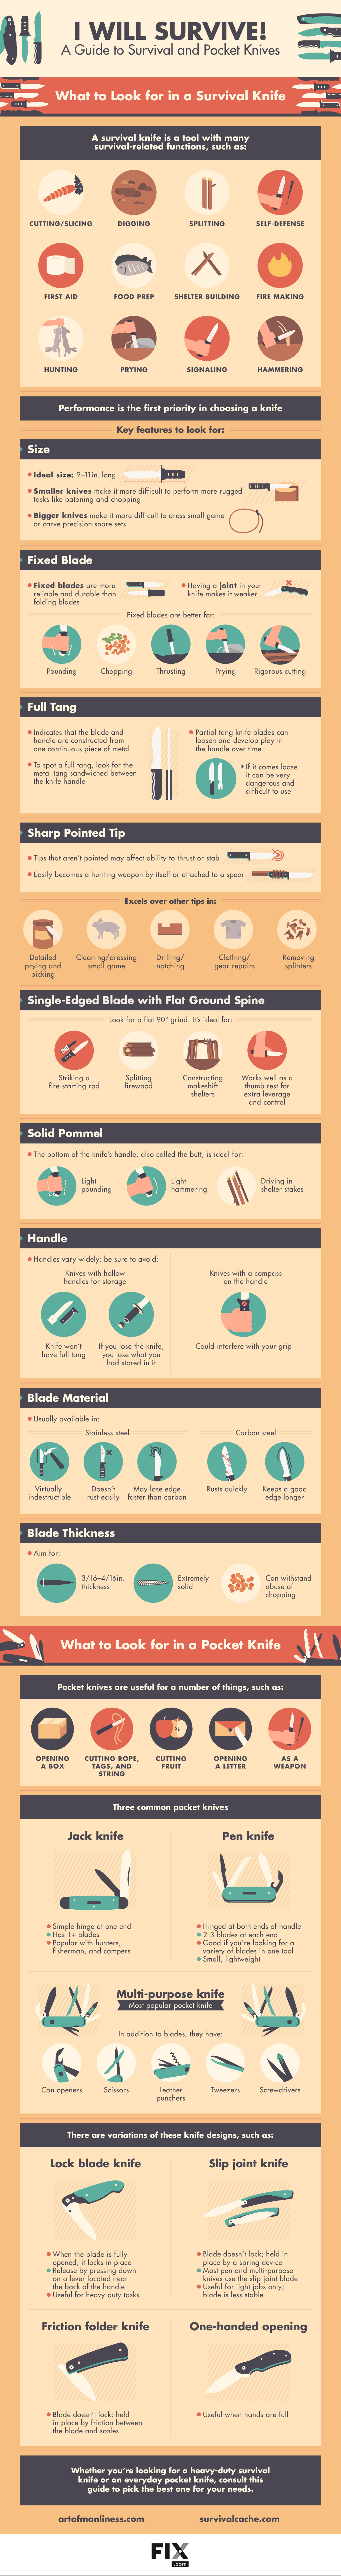 Survival & Pocket Knives are an essential emergency kit item. This infographic will tell you all you need to know to choose the best one | PreparednessMama